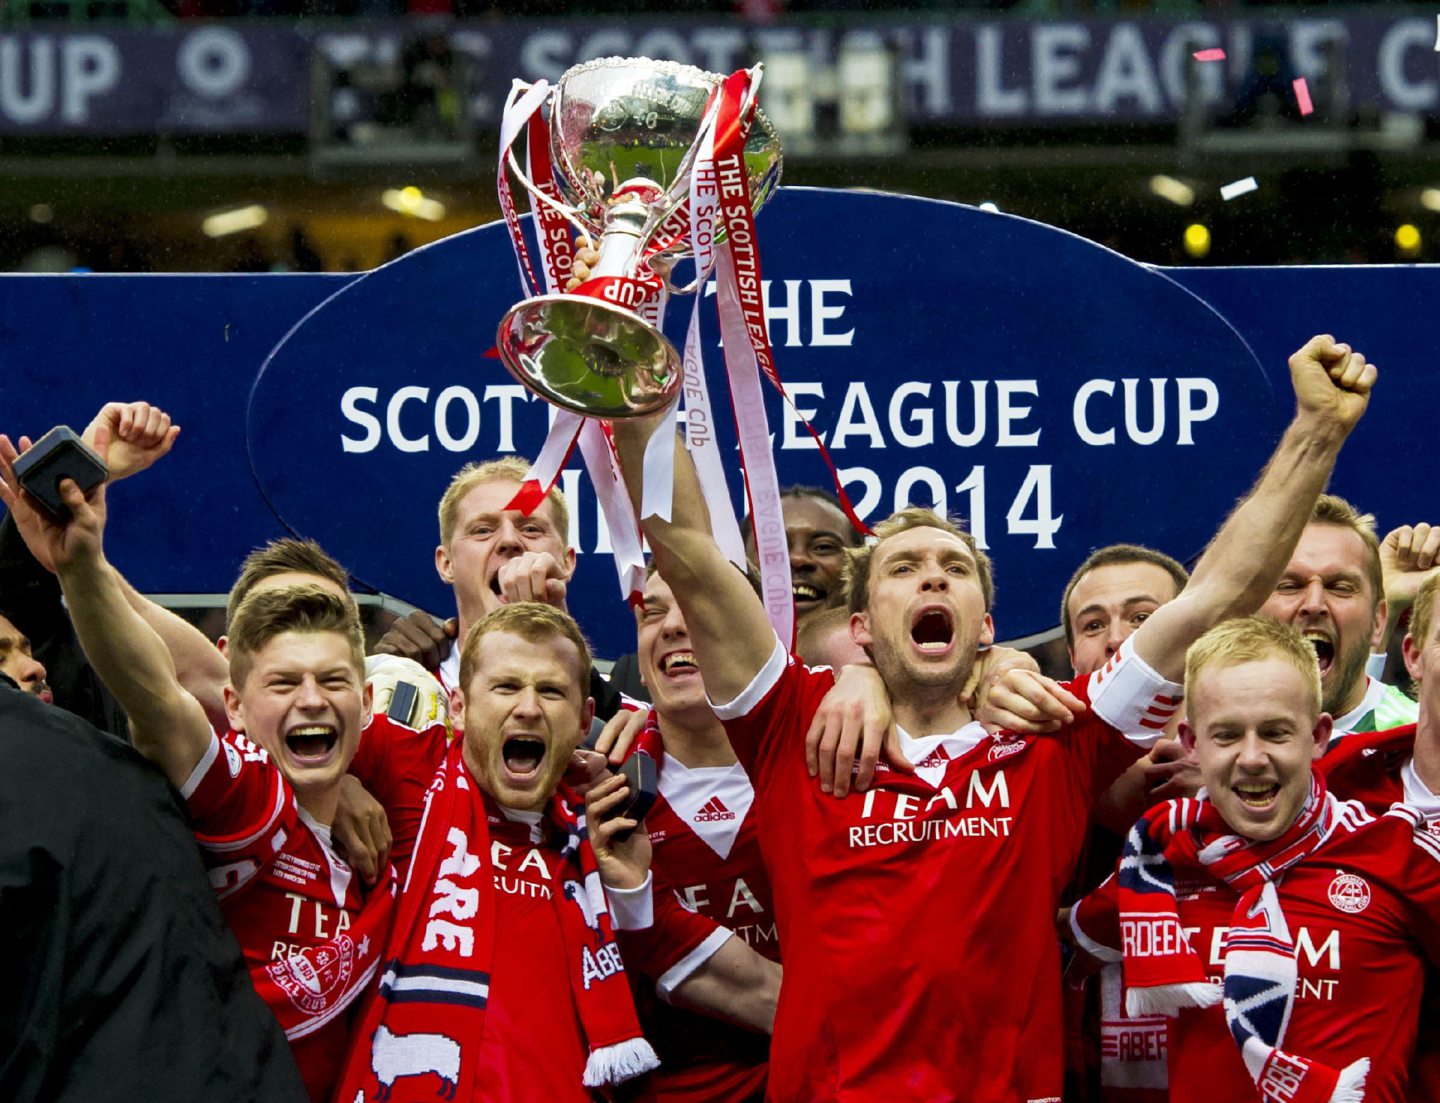 Russell Anderson and his Aberdeen team-mates celebrate win with Scottish League Cup trophy in hand in 2014.